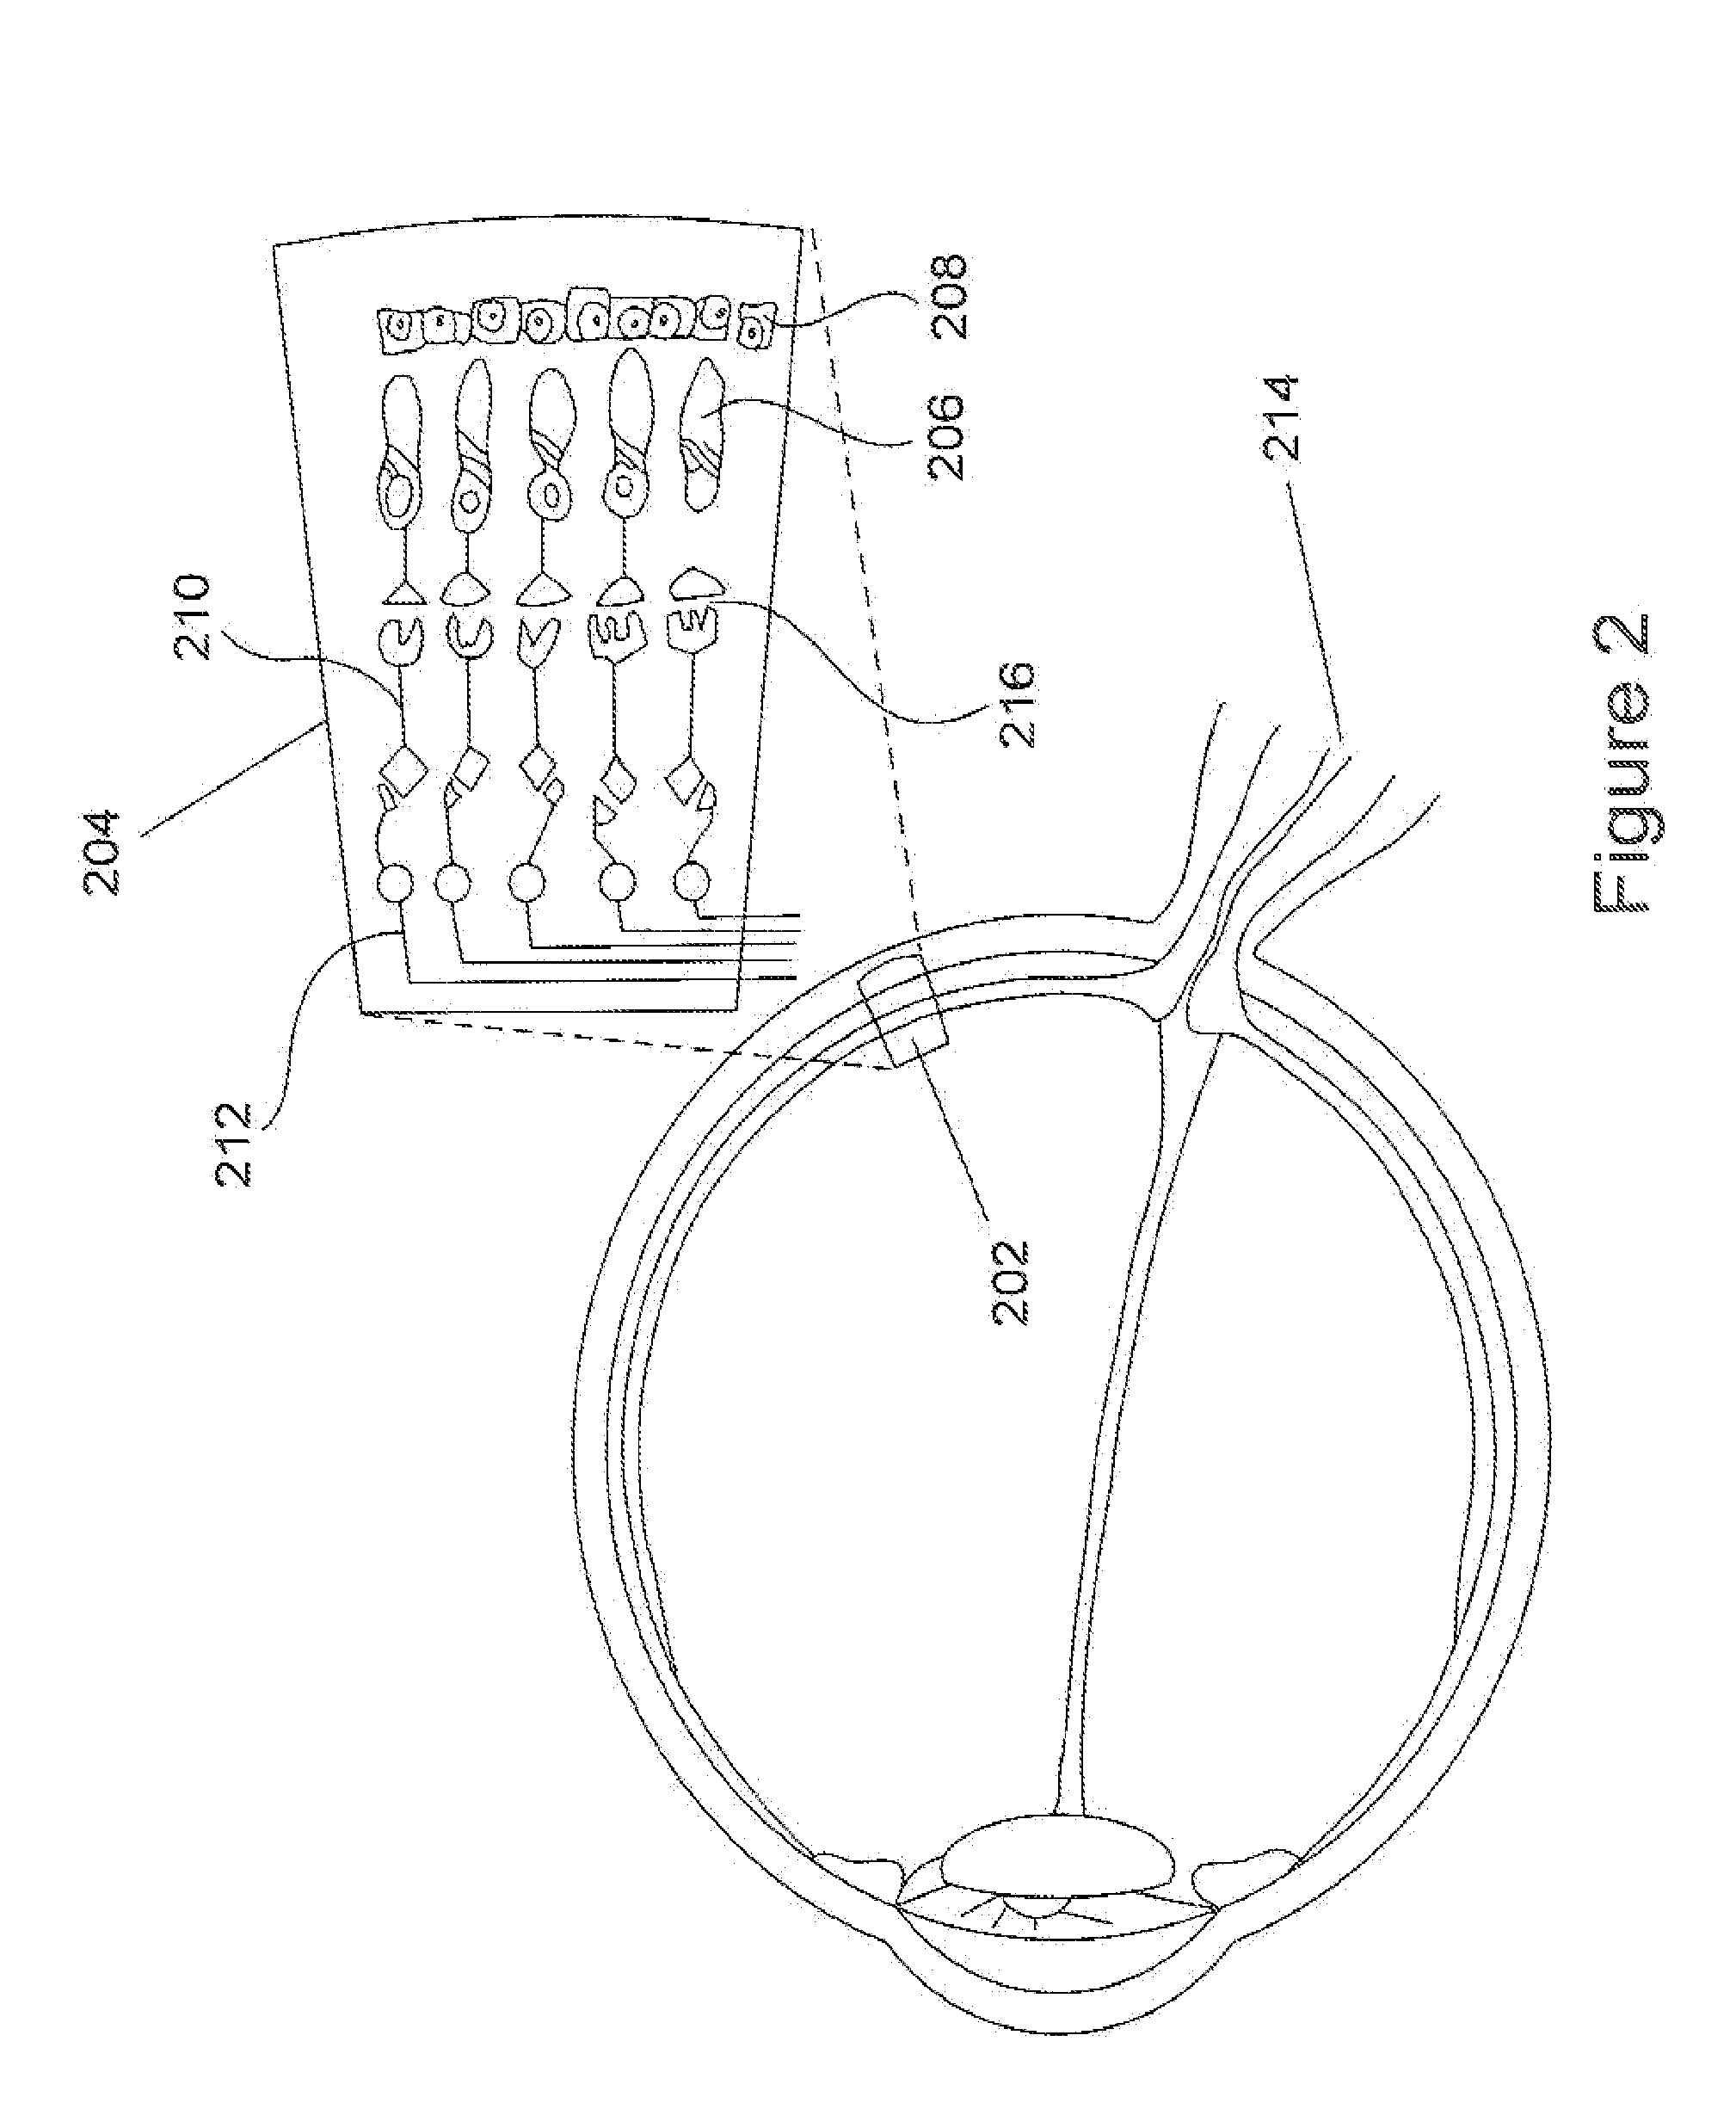 Method and apparatus for limiting growth of eye length